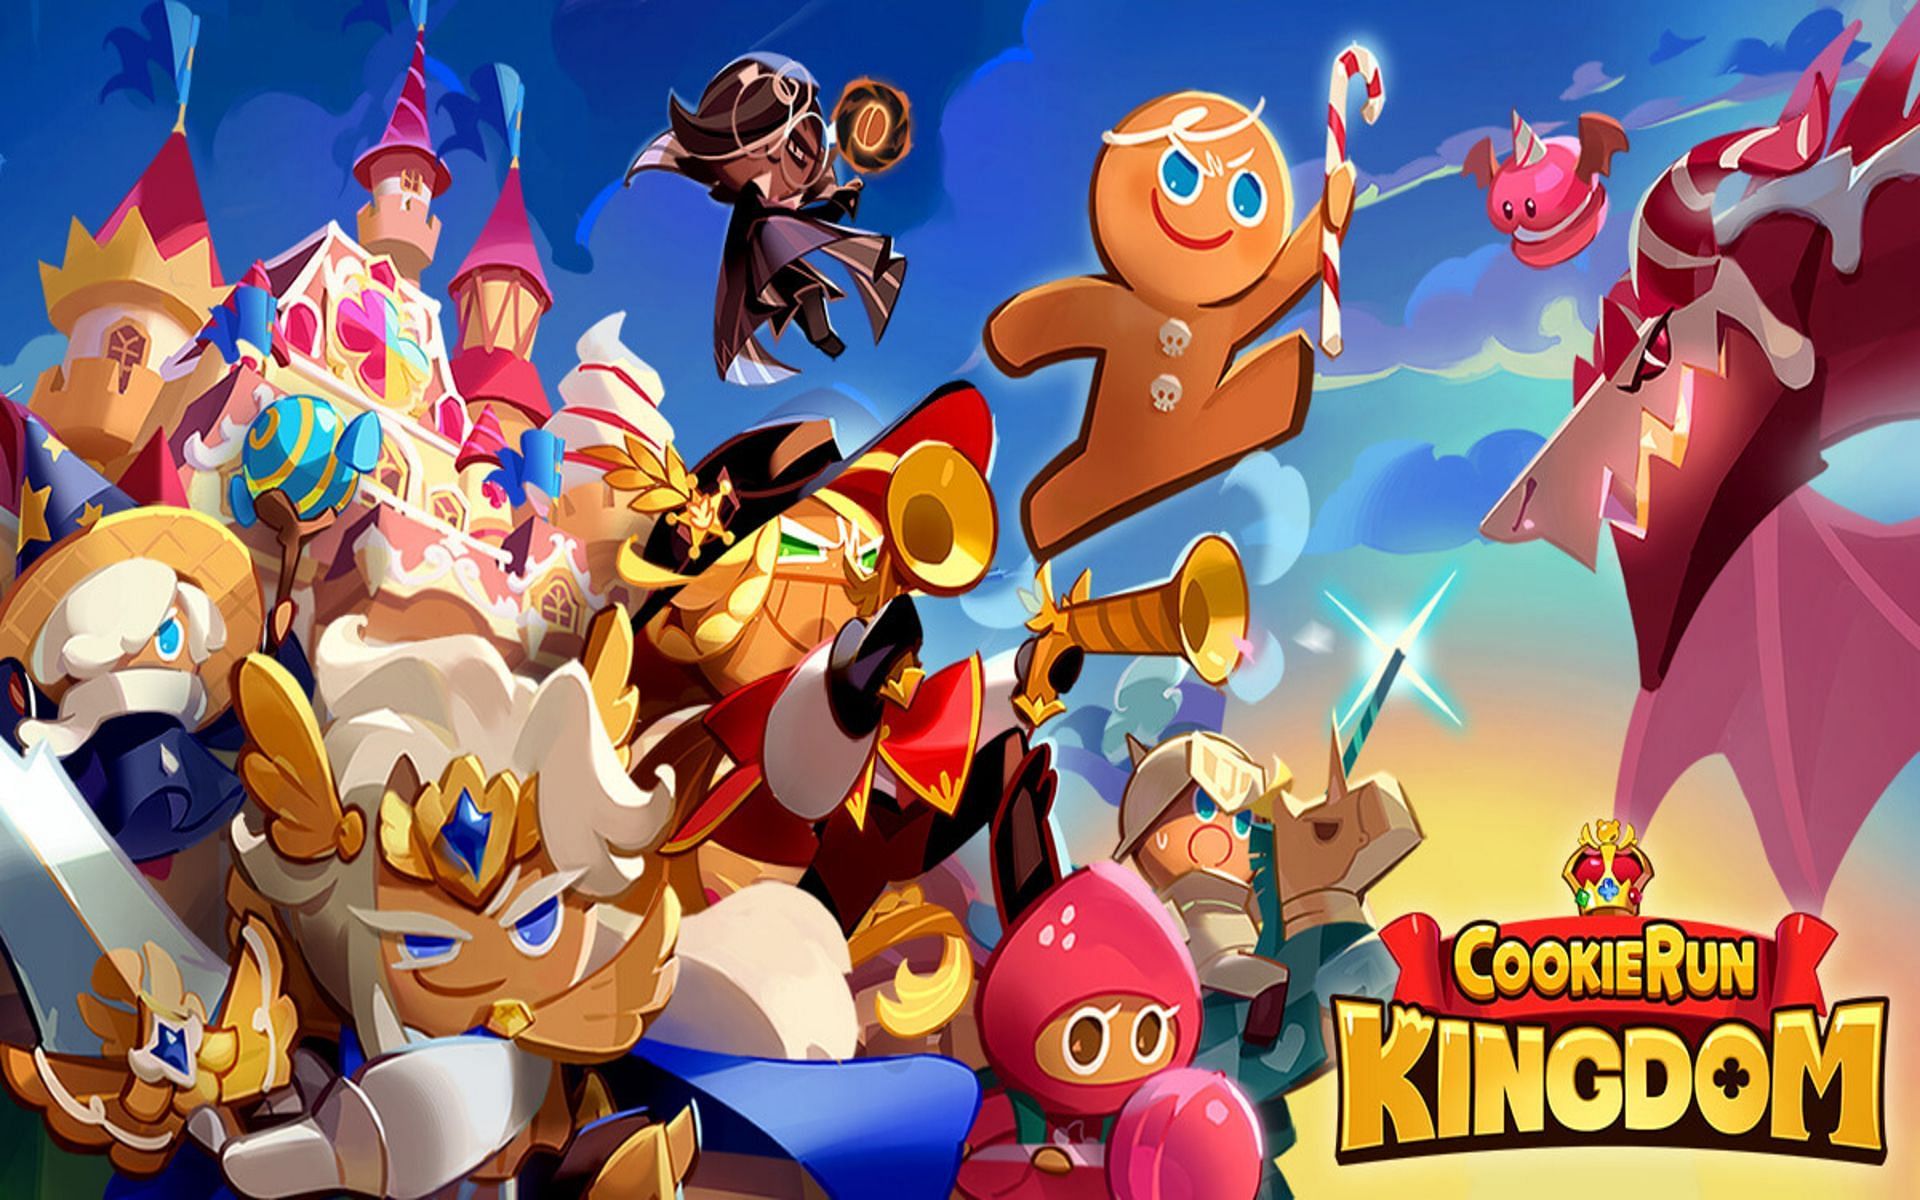 Cookie Run: Kingdom is one of the more popular mobile games currently (Image via Devsisters)